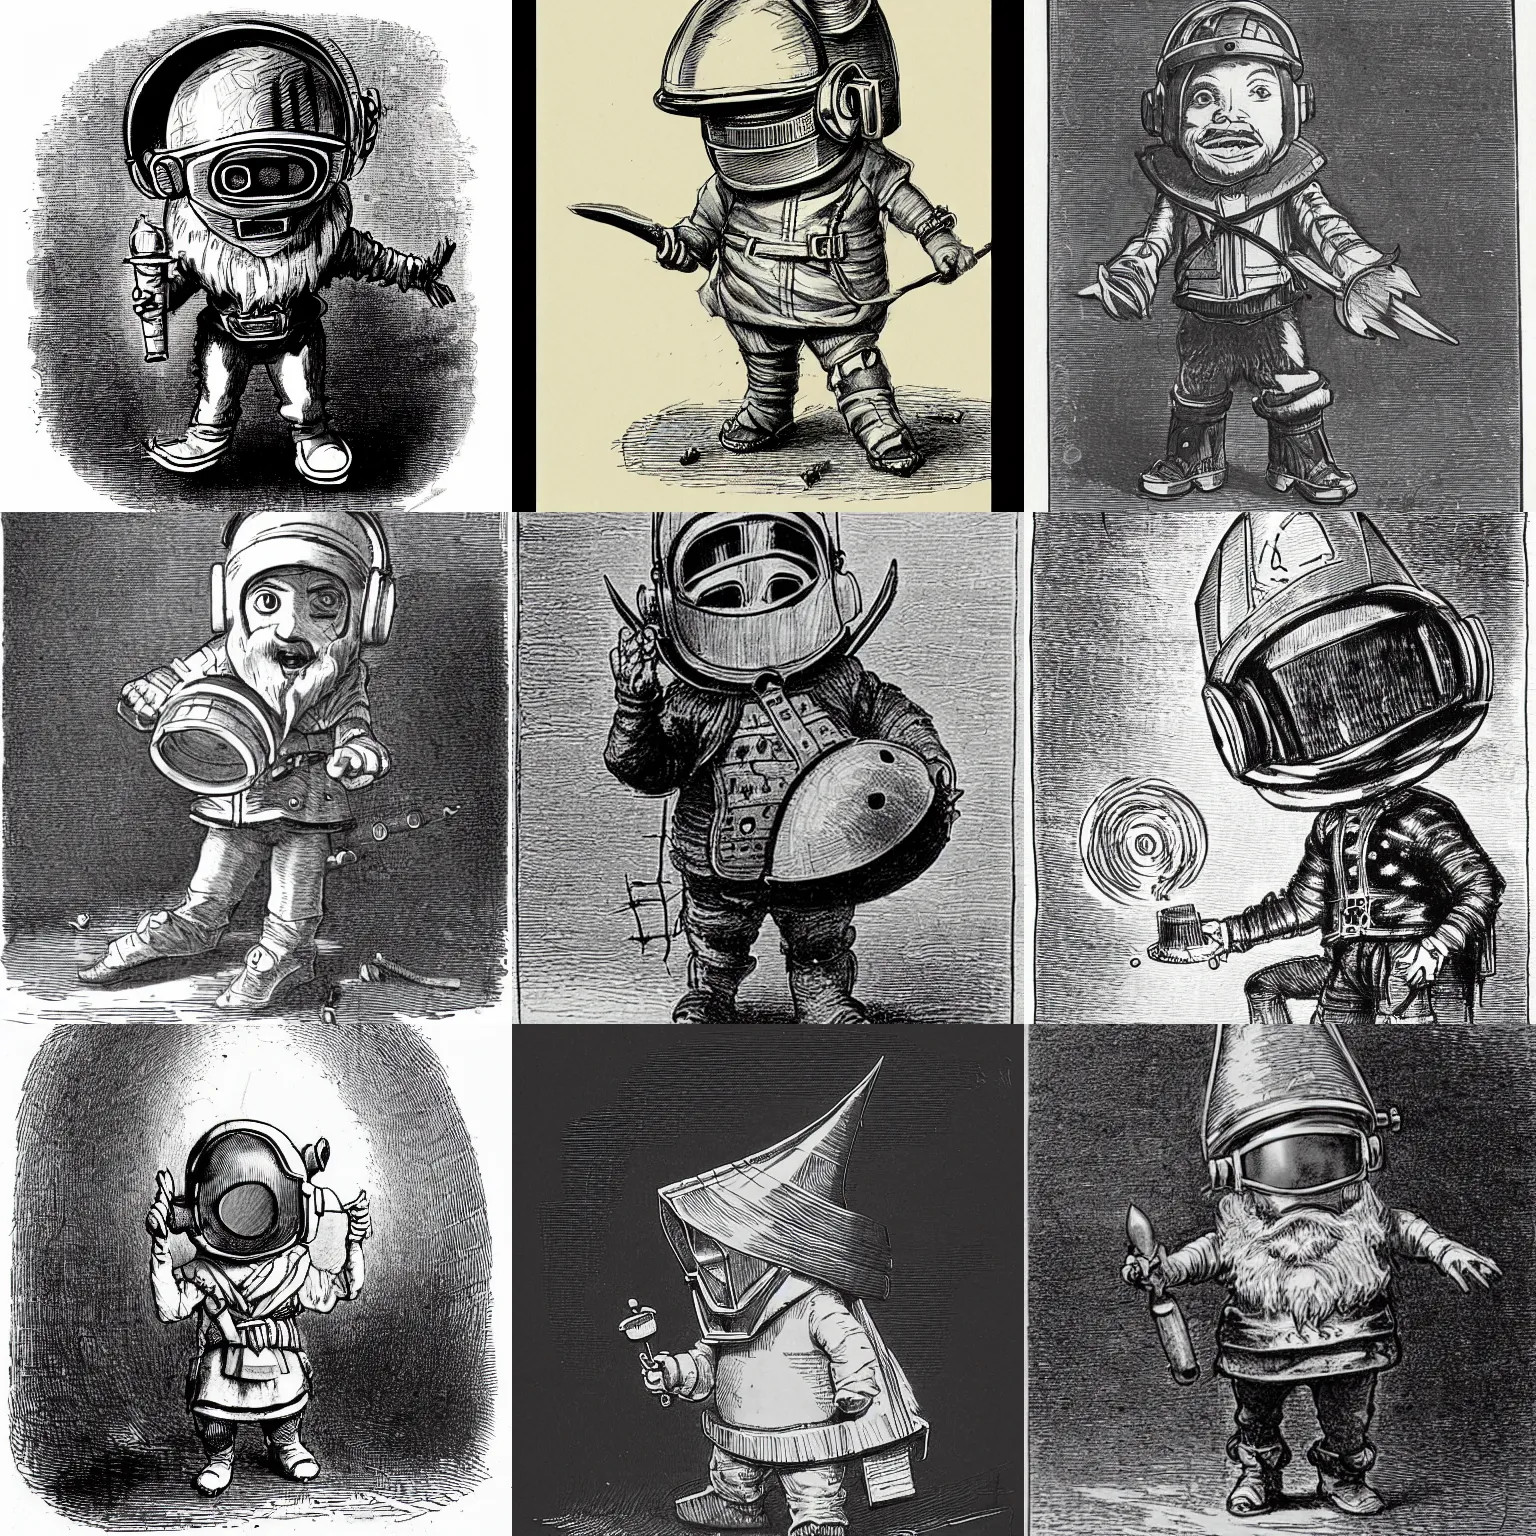 Prompt: sketch of a cute chibi dnd gnome inventor tinkerer wearing a daft punk helmet, he is walking cautiously holding an elaborate mine lantern, etching by louis le breton, 1 8 6 9, 1 2 0 0 dpi scan